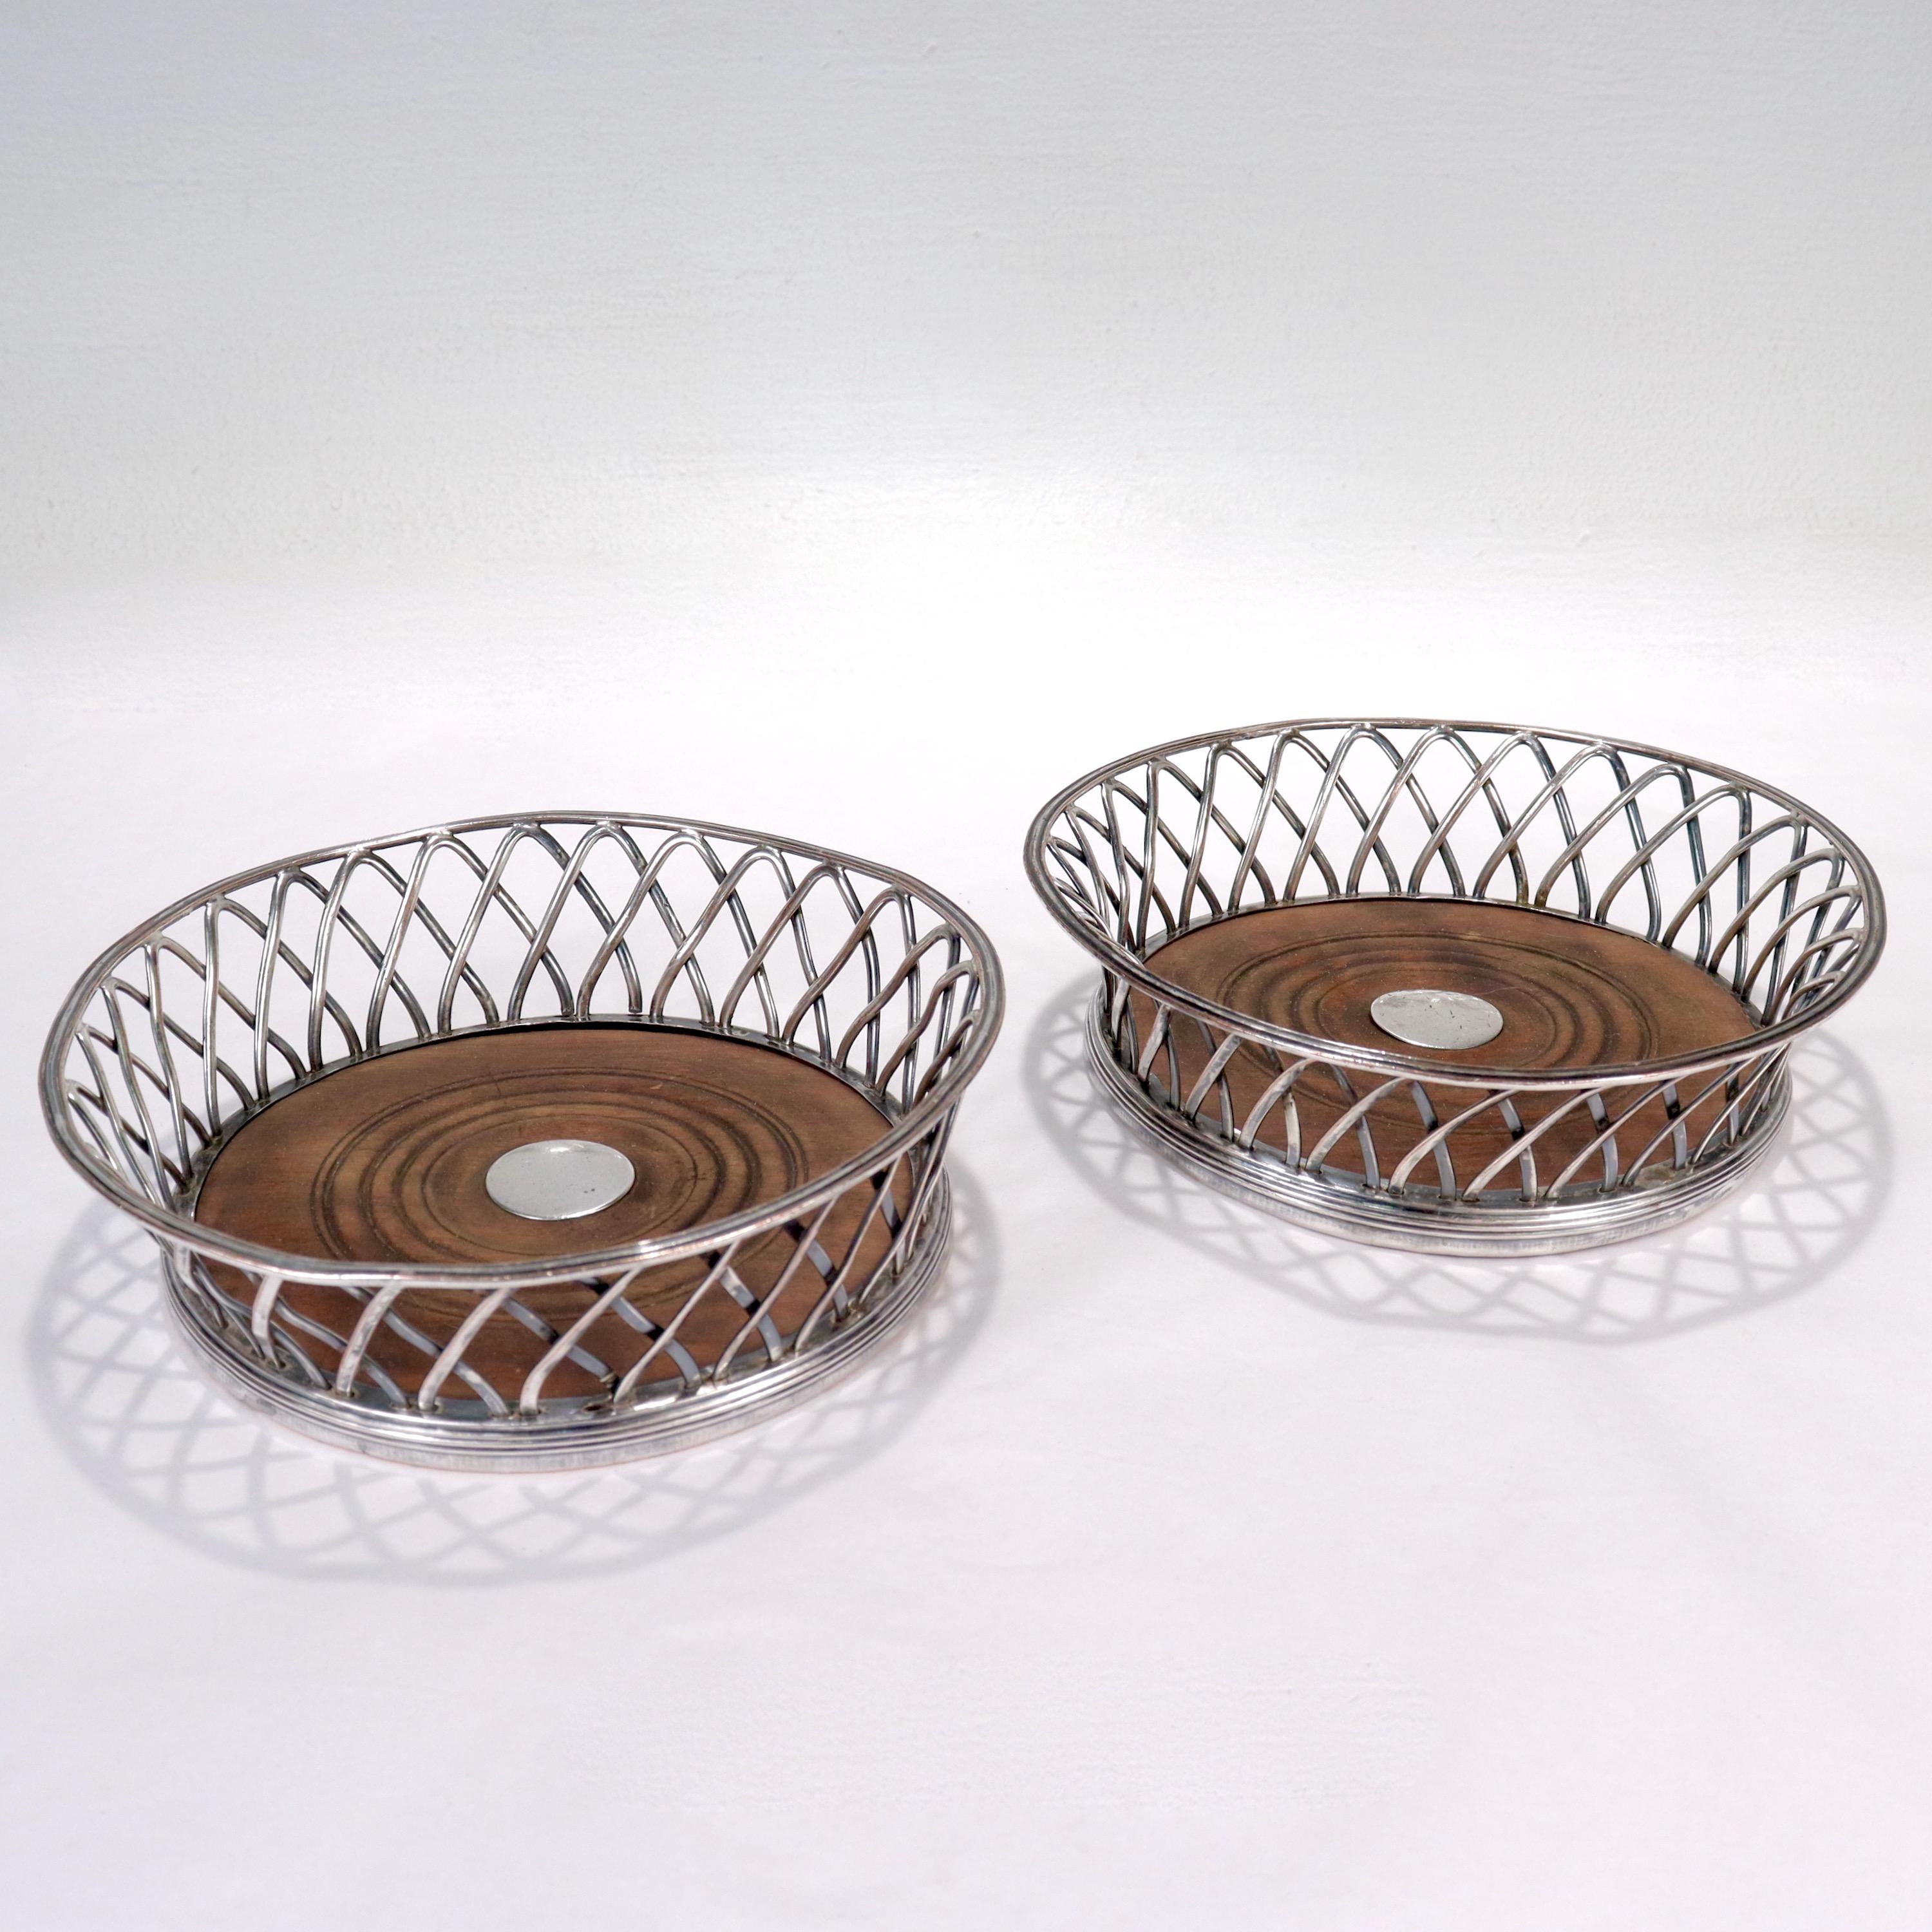 A fine pair of antique Sheffield silver plate wine coasters. 

In the form of wirework baskets.

With Sheffield type silver plate on copper and turned wooden bases.

Simply a great pair of Period wine coasters!

Date:
Late 18th or Early 19th